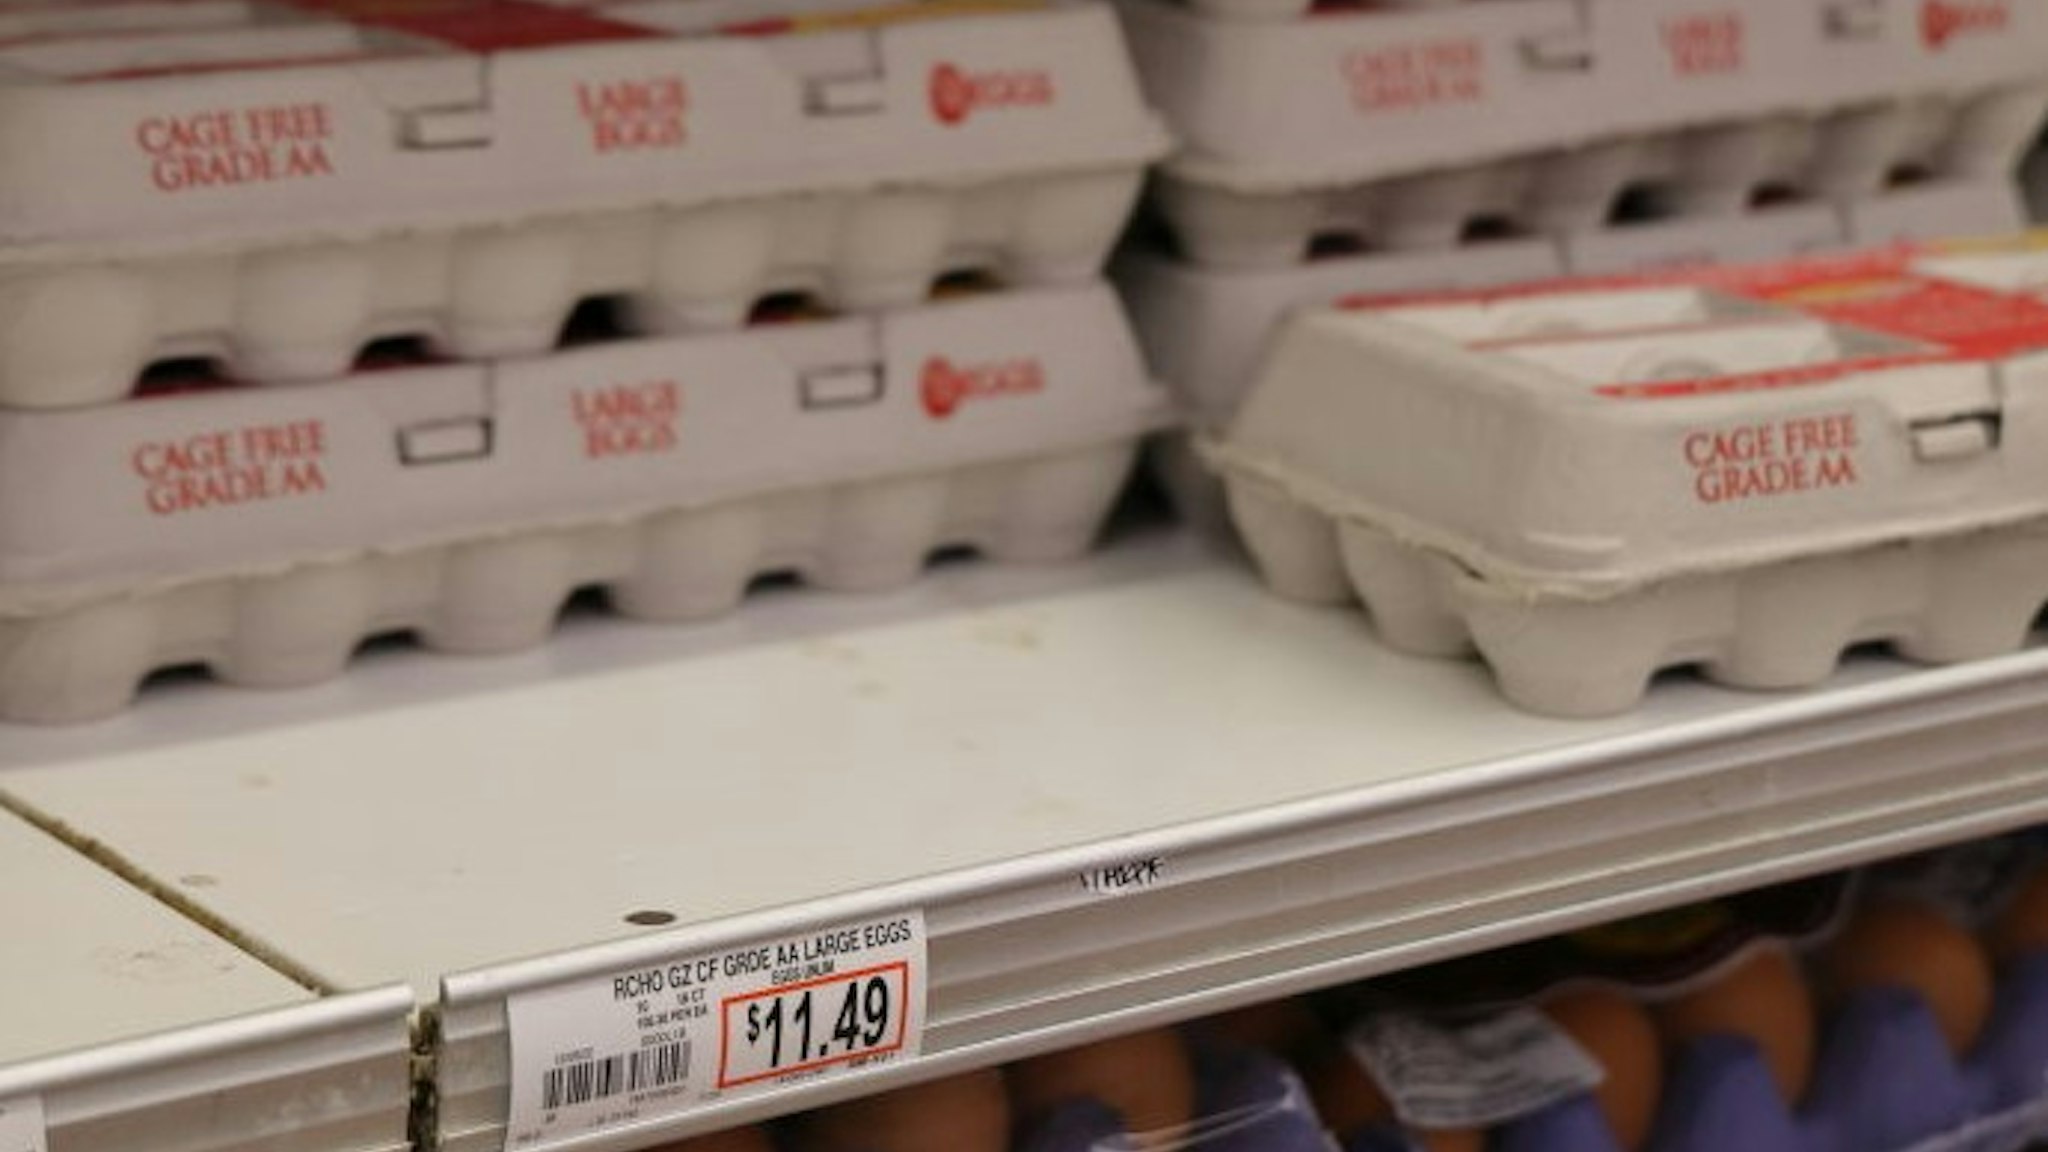 LOS ANGELES, CA - JANUARY 08: Cartons of eggs are displayed for sale at a supermarket on January 8, 2023 in Los Angeles, California. (Photo by